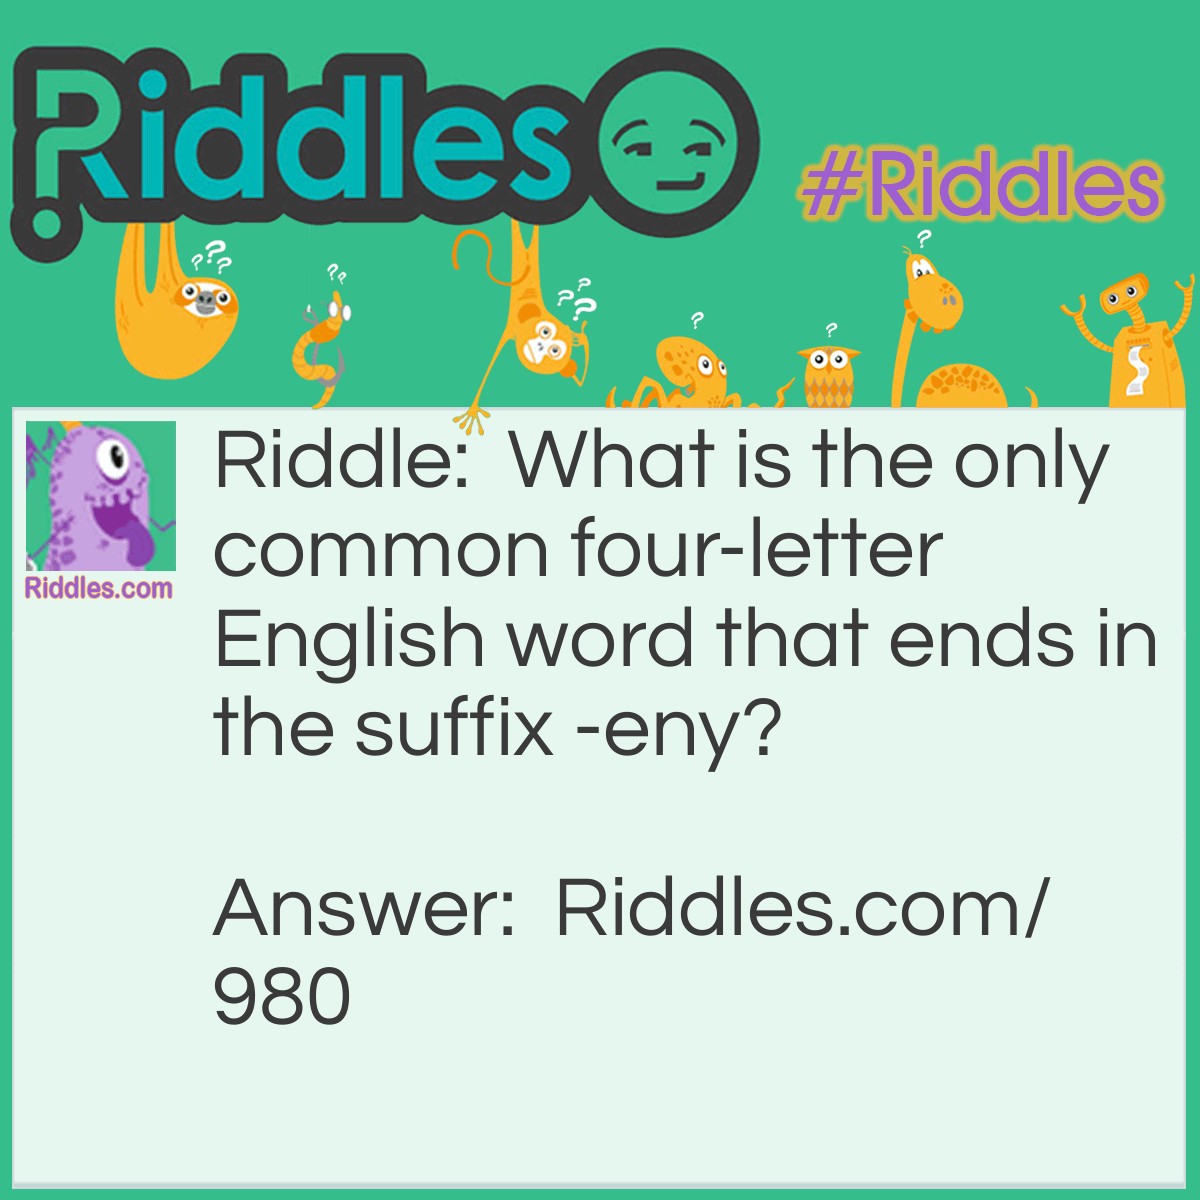 Riddle: What is the only common four-letter English word that ends in the suffix -eny? Answer: Deny.